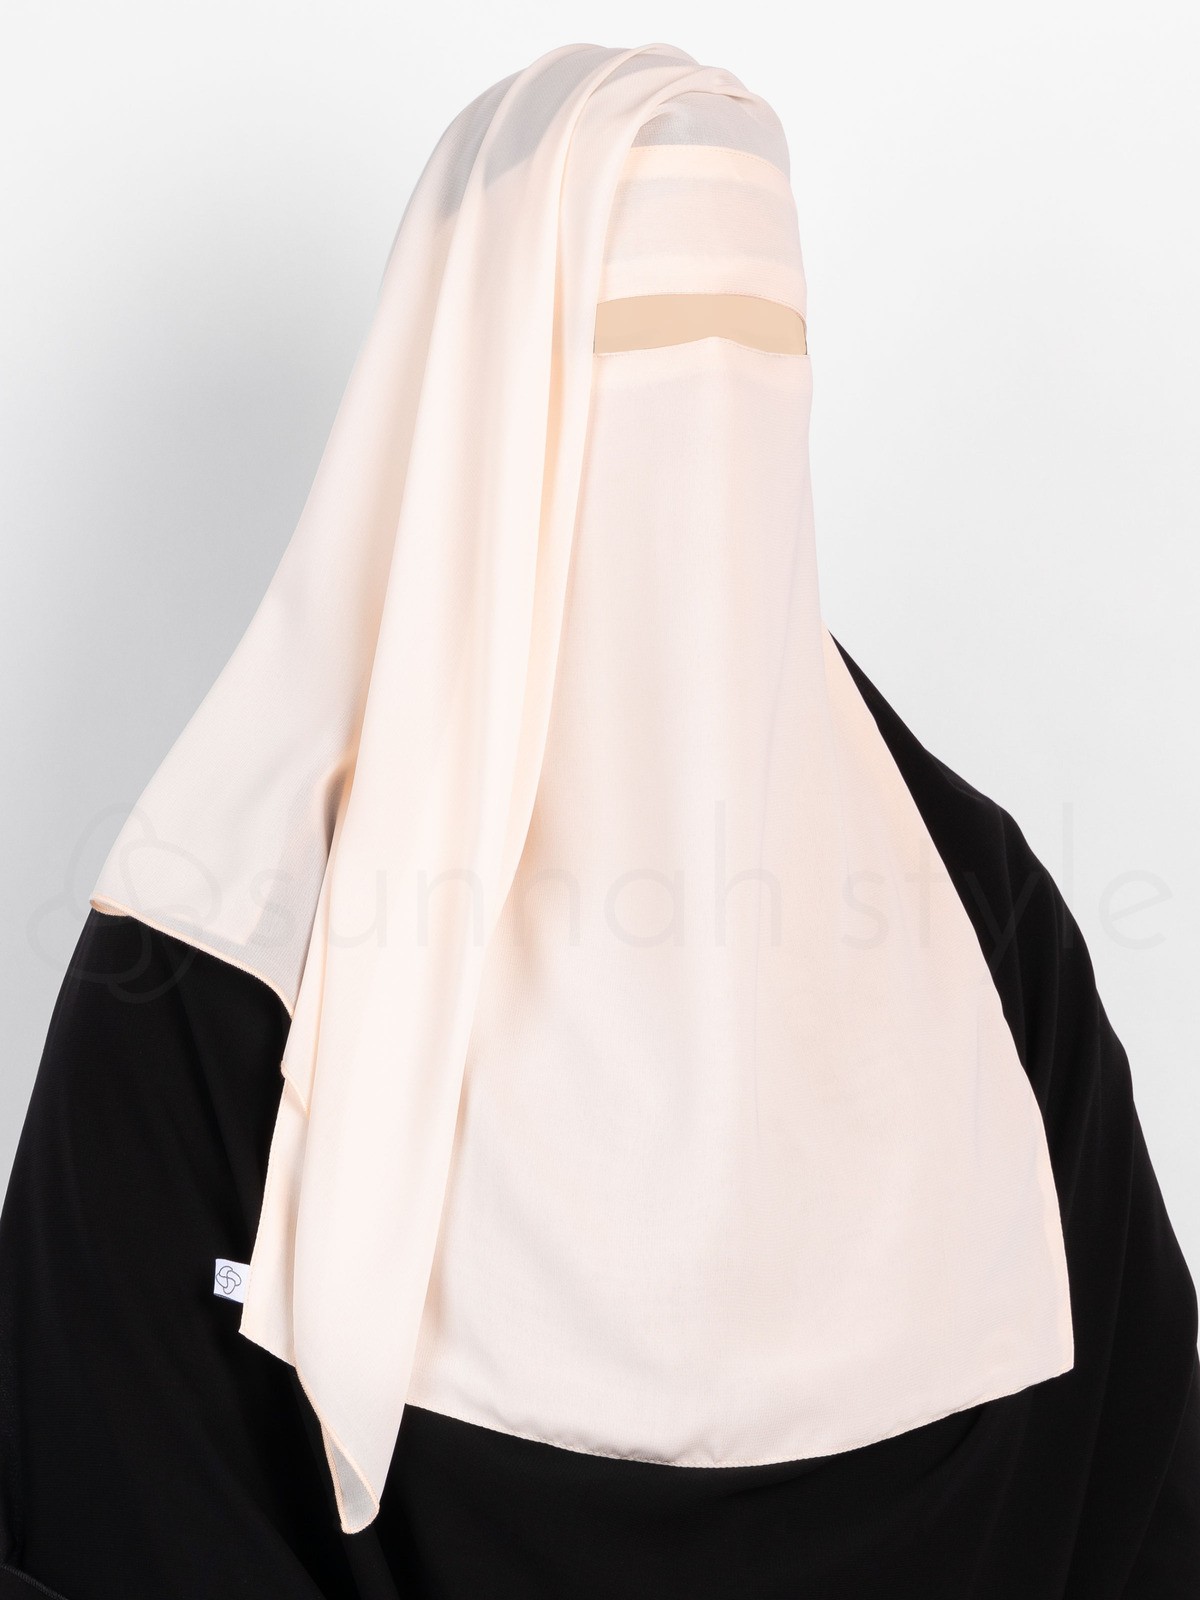 Sunnah Style - Two Layer Niqab (Caramel)